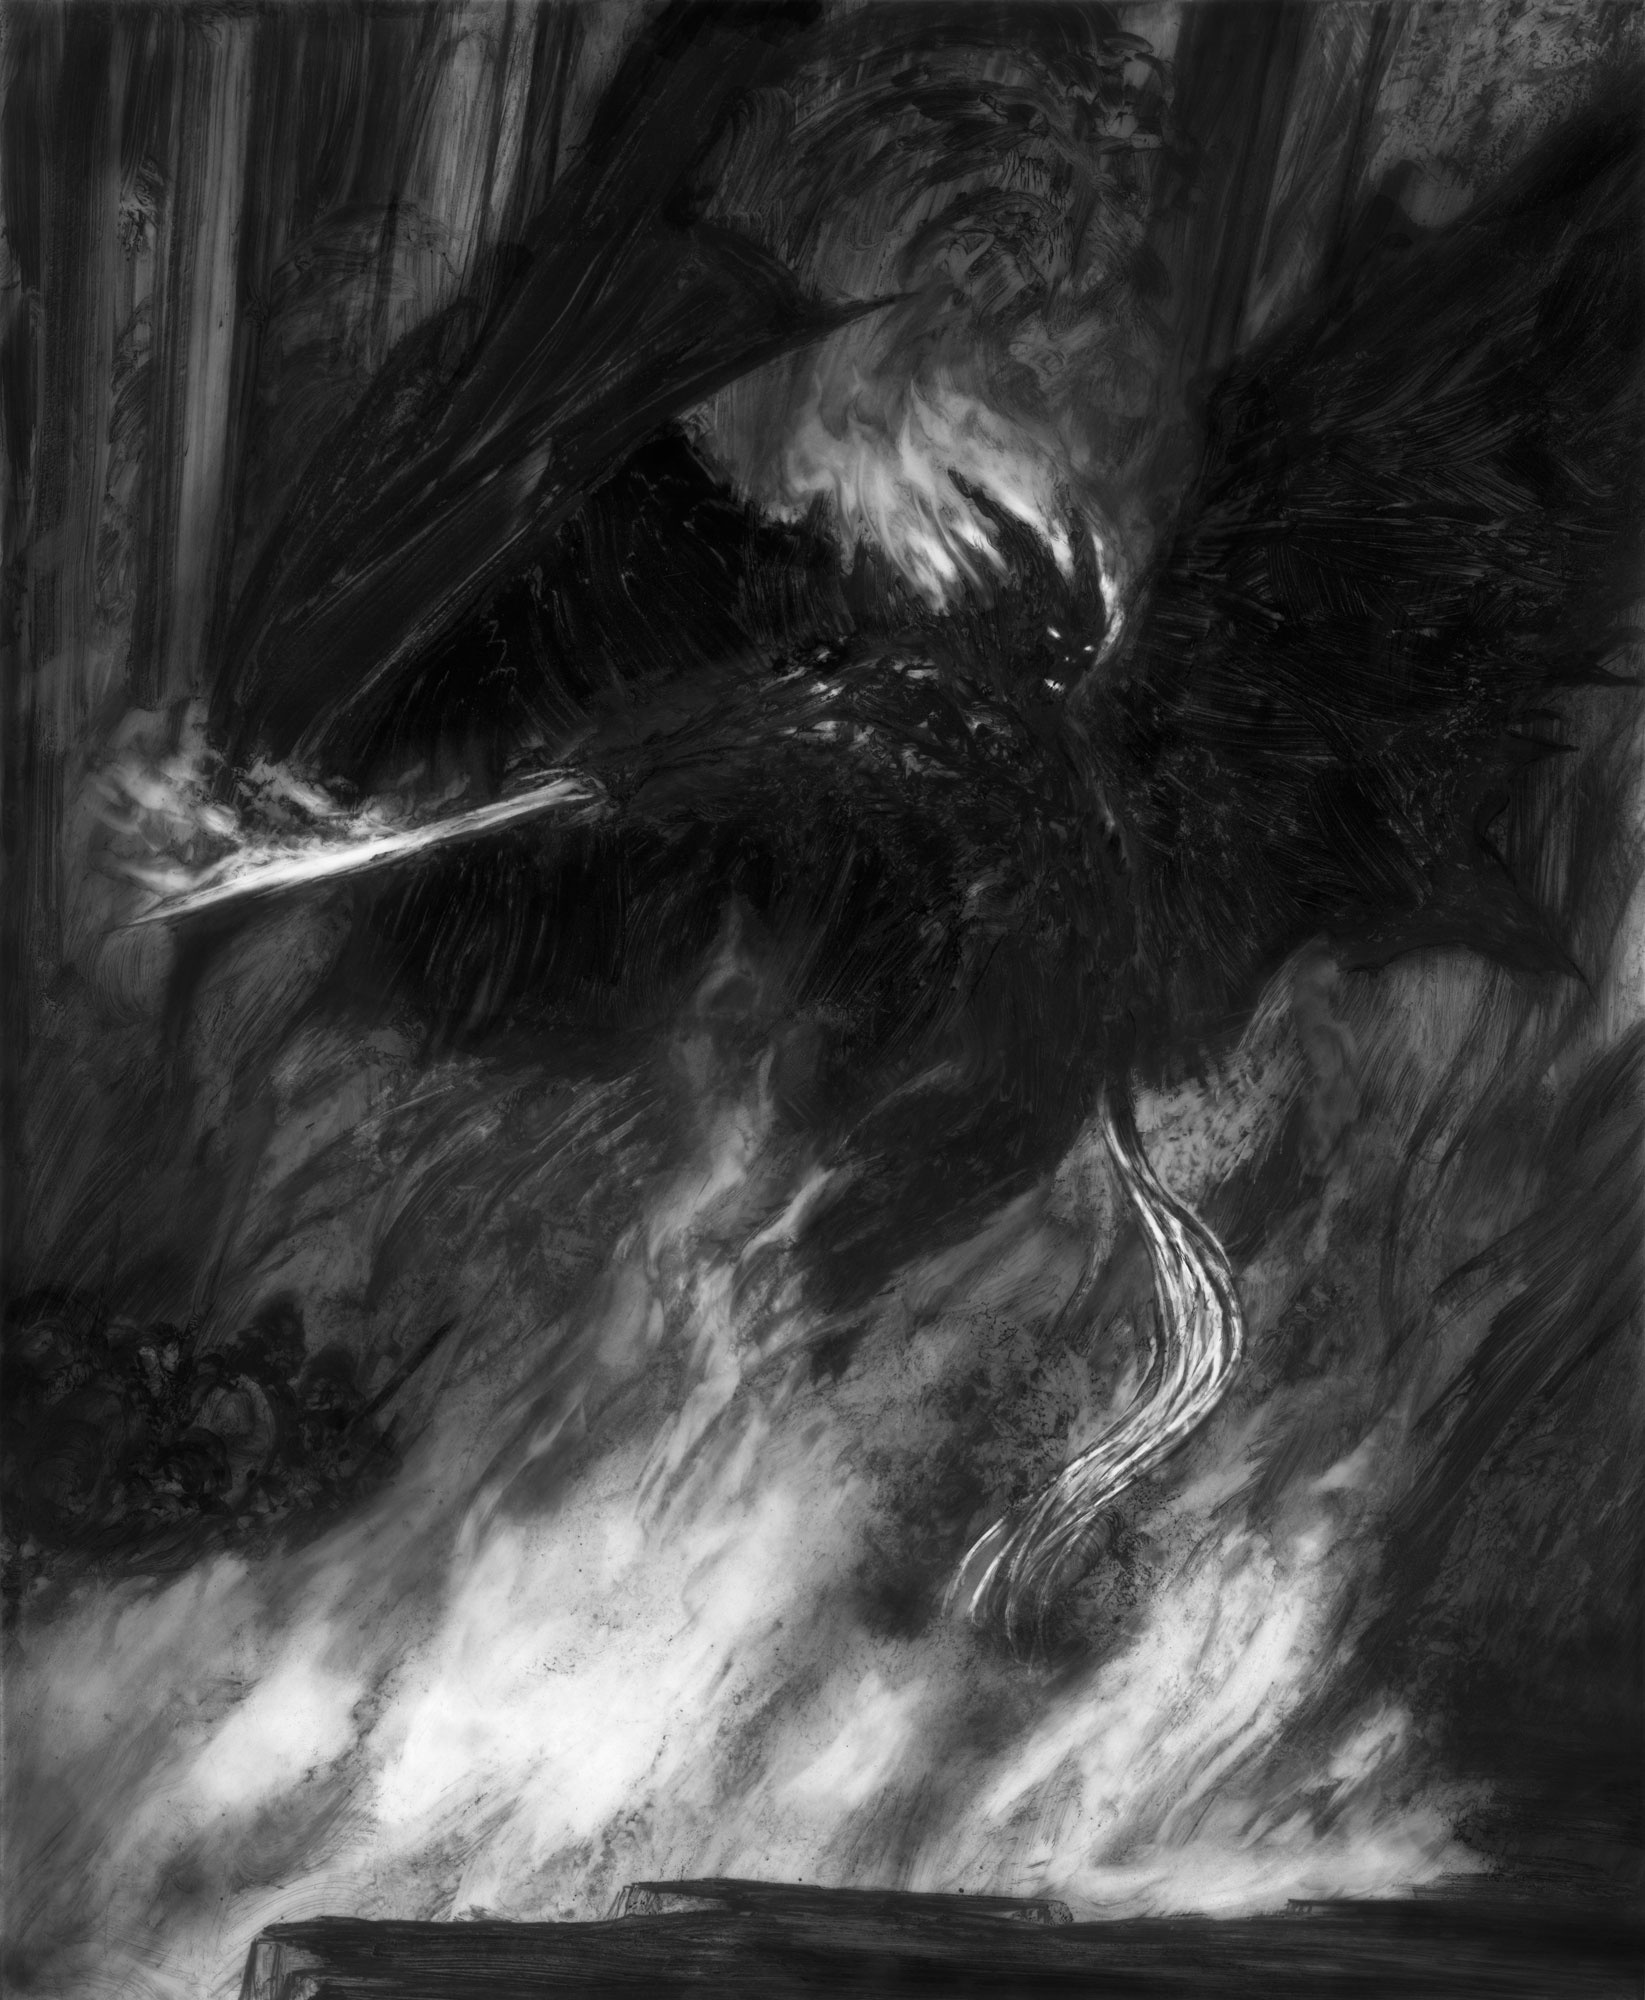 The Balrog of Moria - Chasm
17" x 14" graphite pencil and paint 2019
private collection